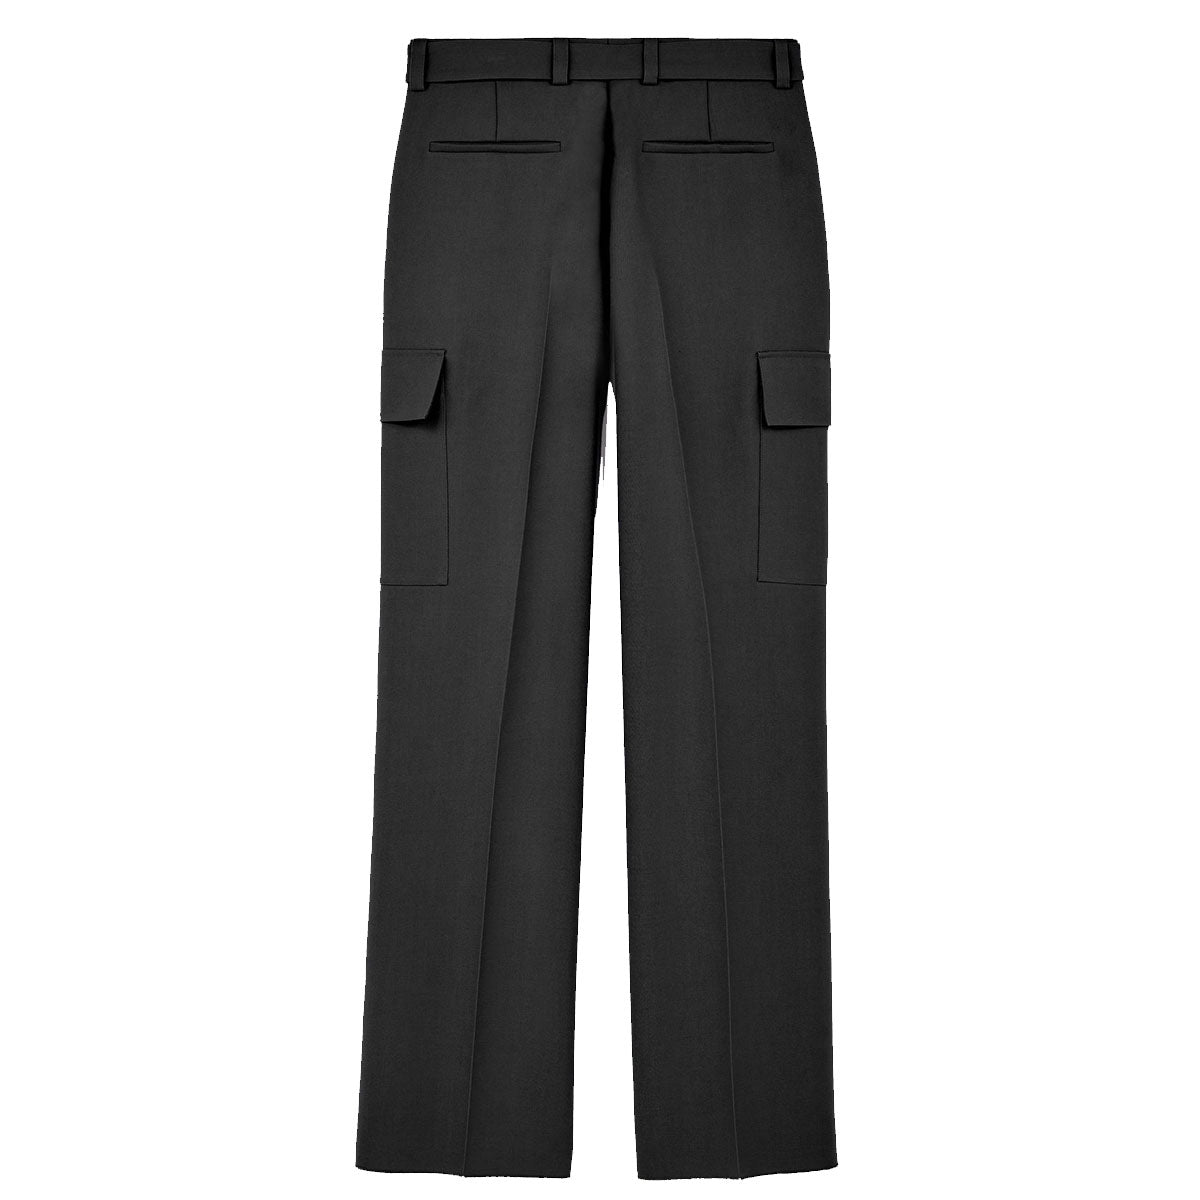 TROUSER E 04 AW 25 - Why are you here?